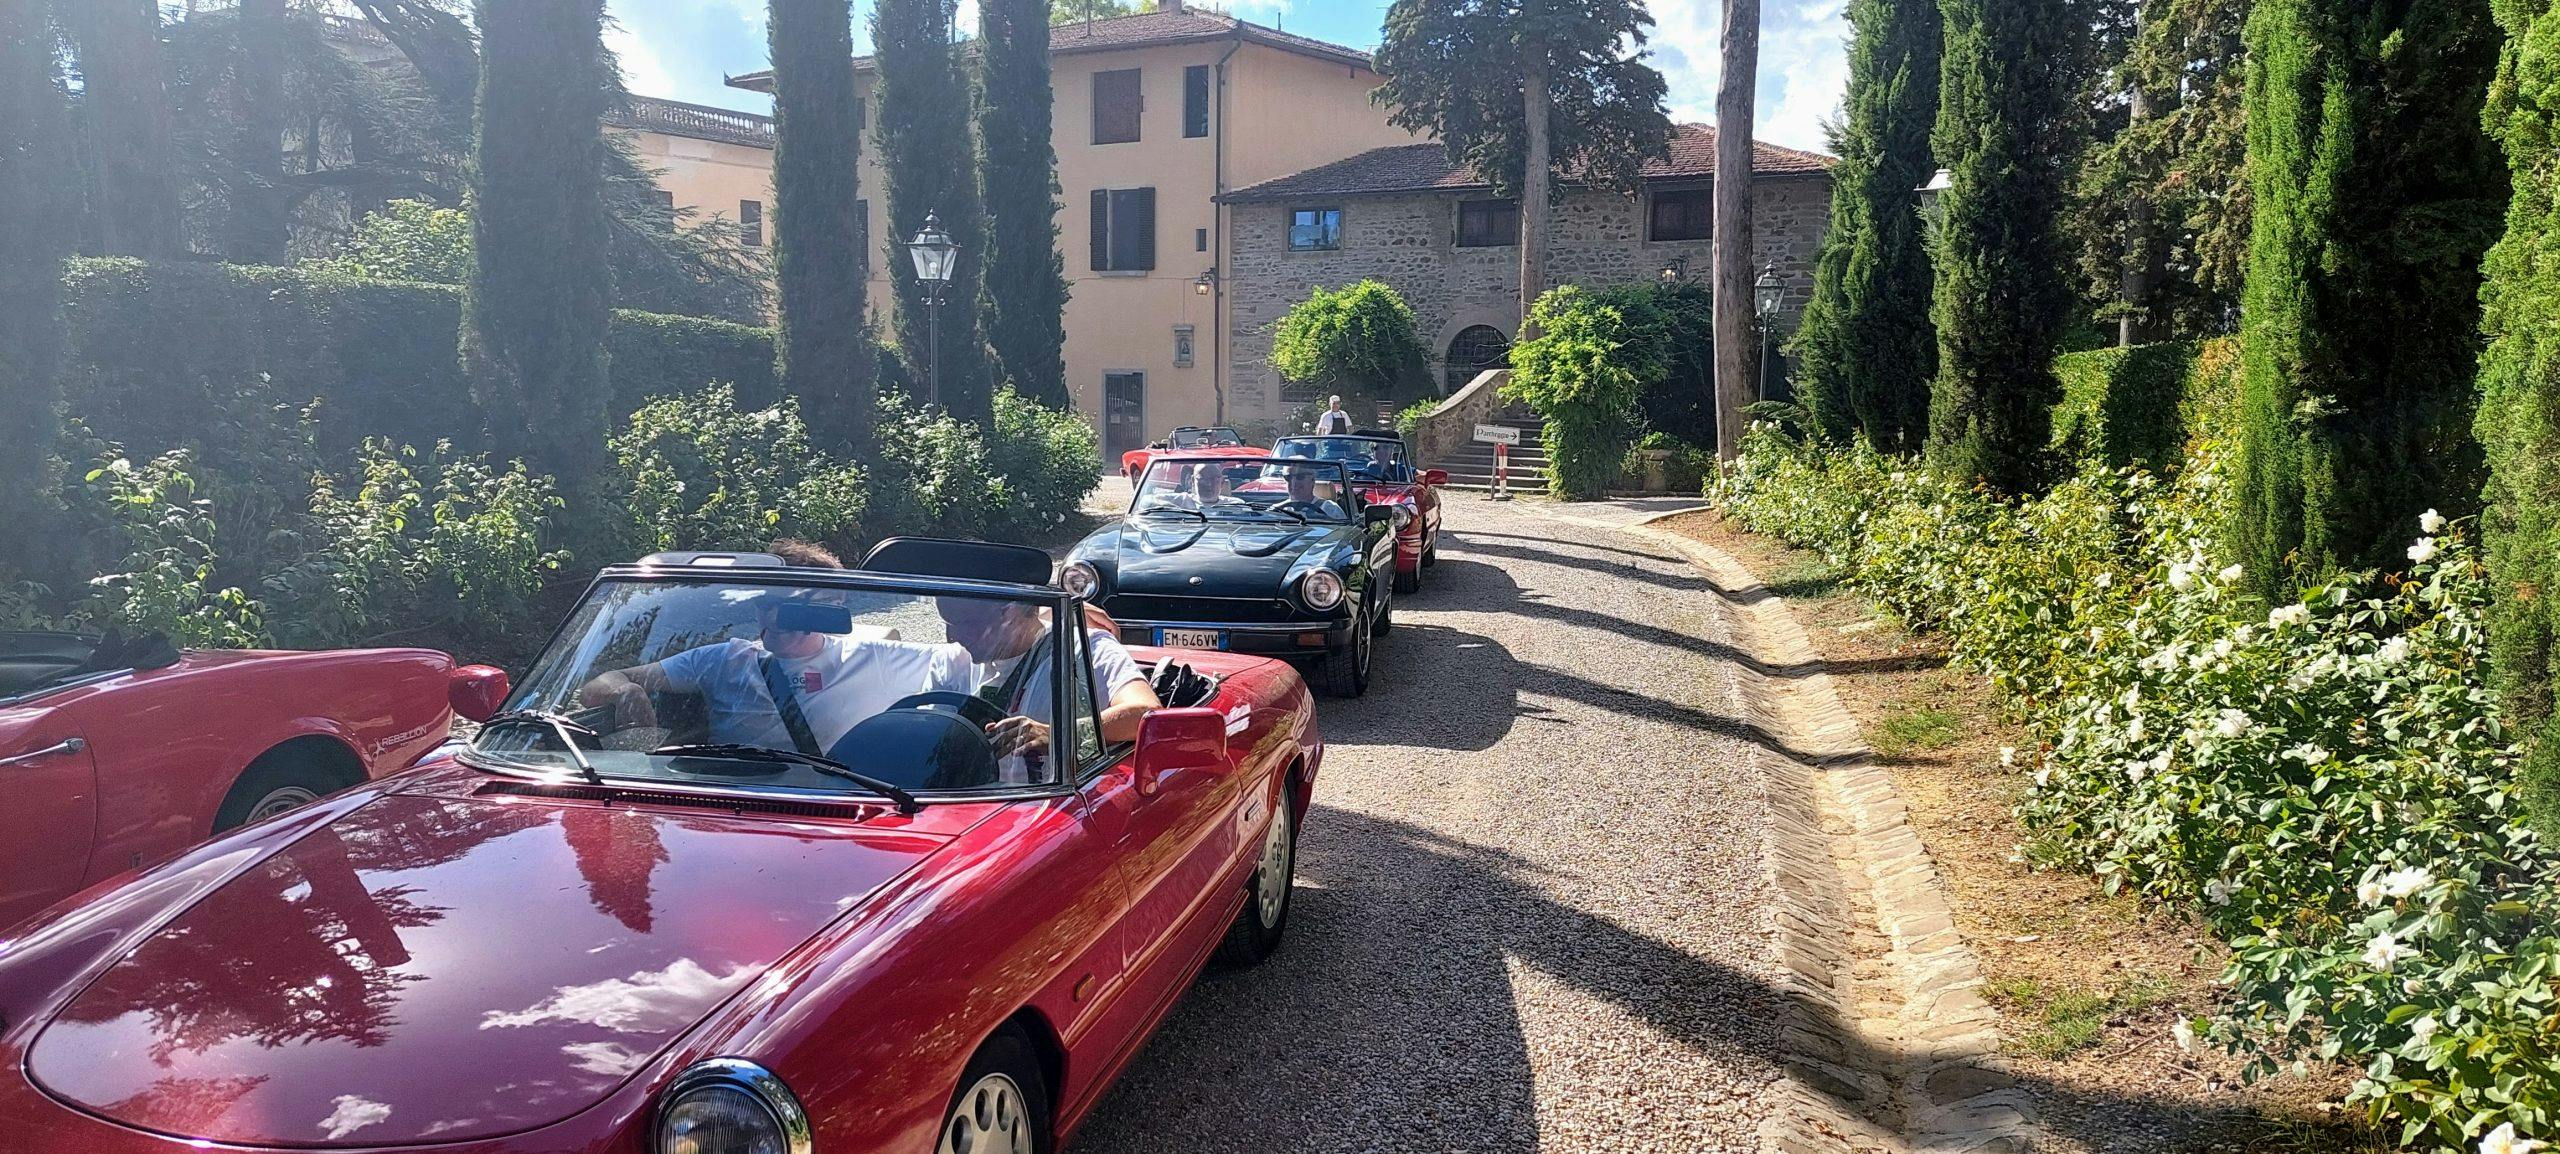 vintage cars incentive trip in tuscany